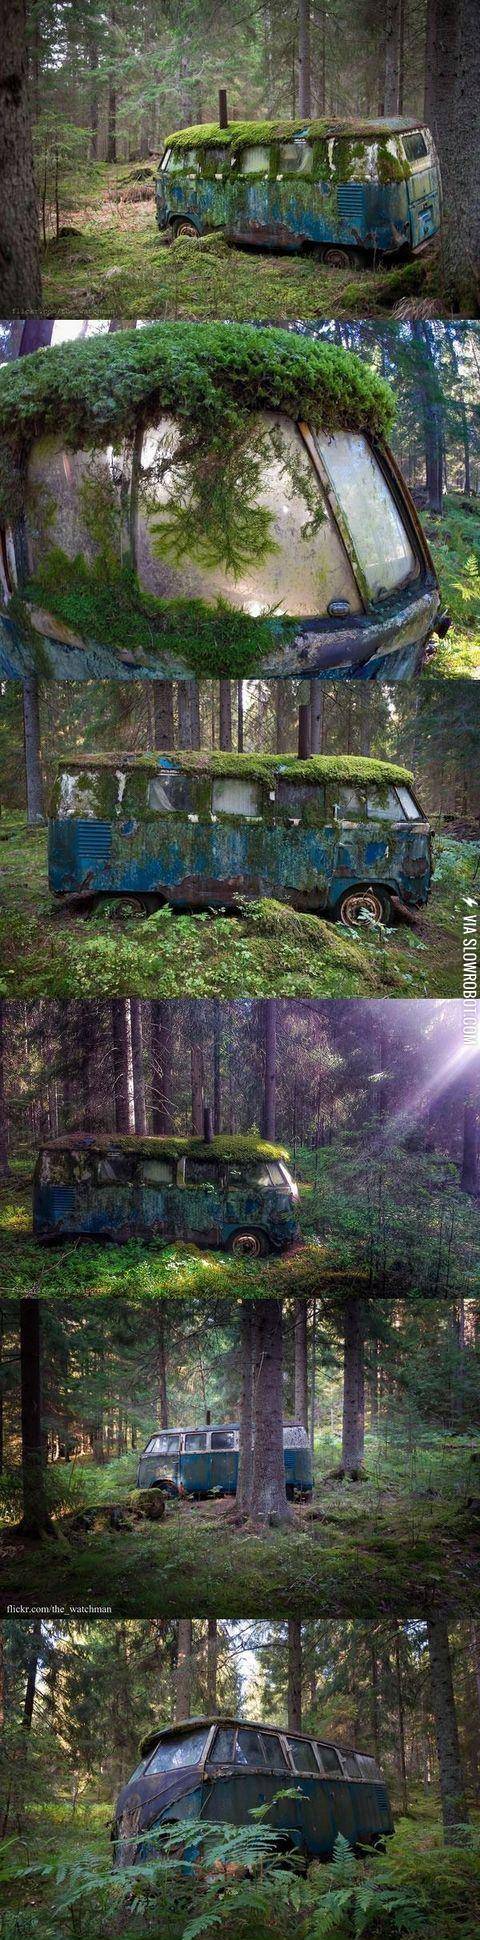 Abandoned+VW+bus+that+was+once+someone%26%23039%3Bs+home%2C+deep+in+the+forests+of+Norway